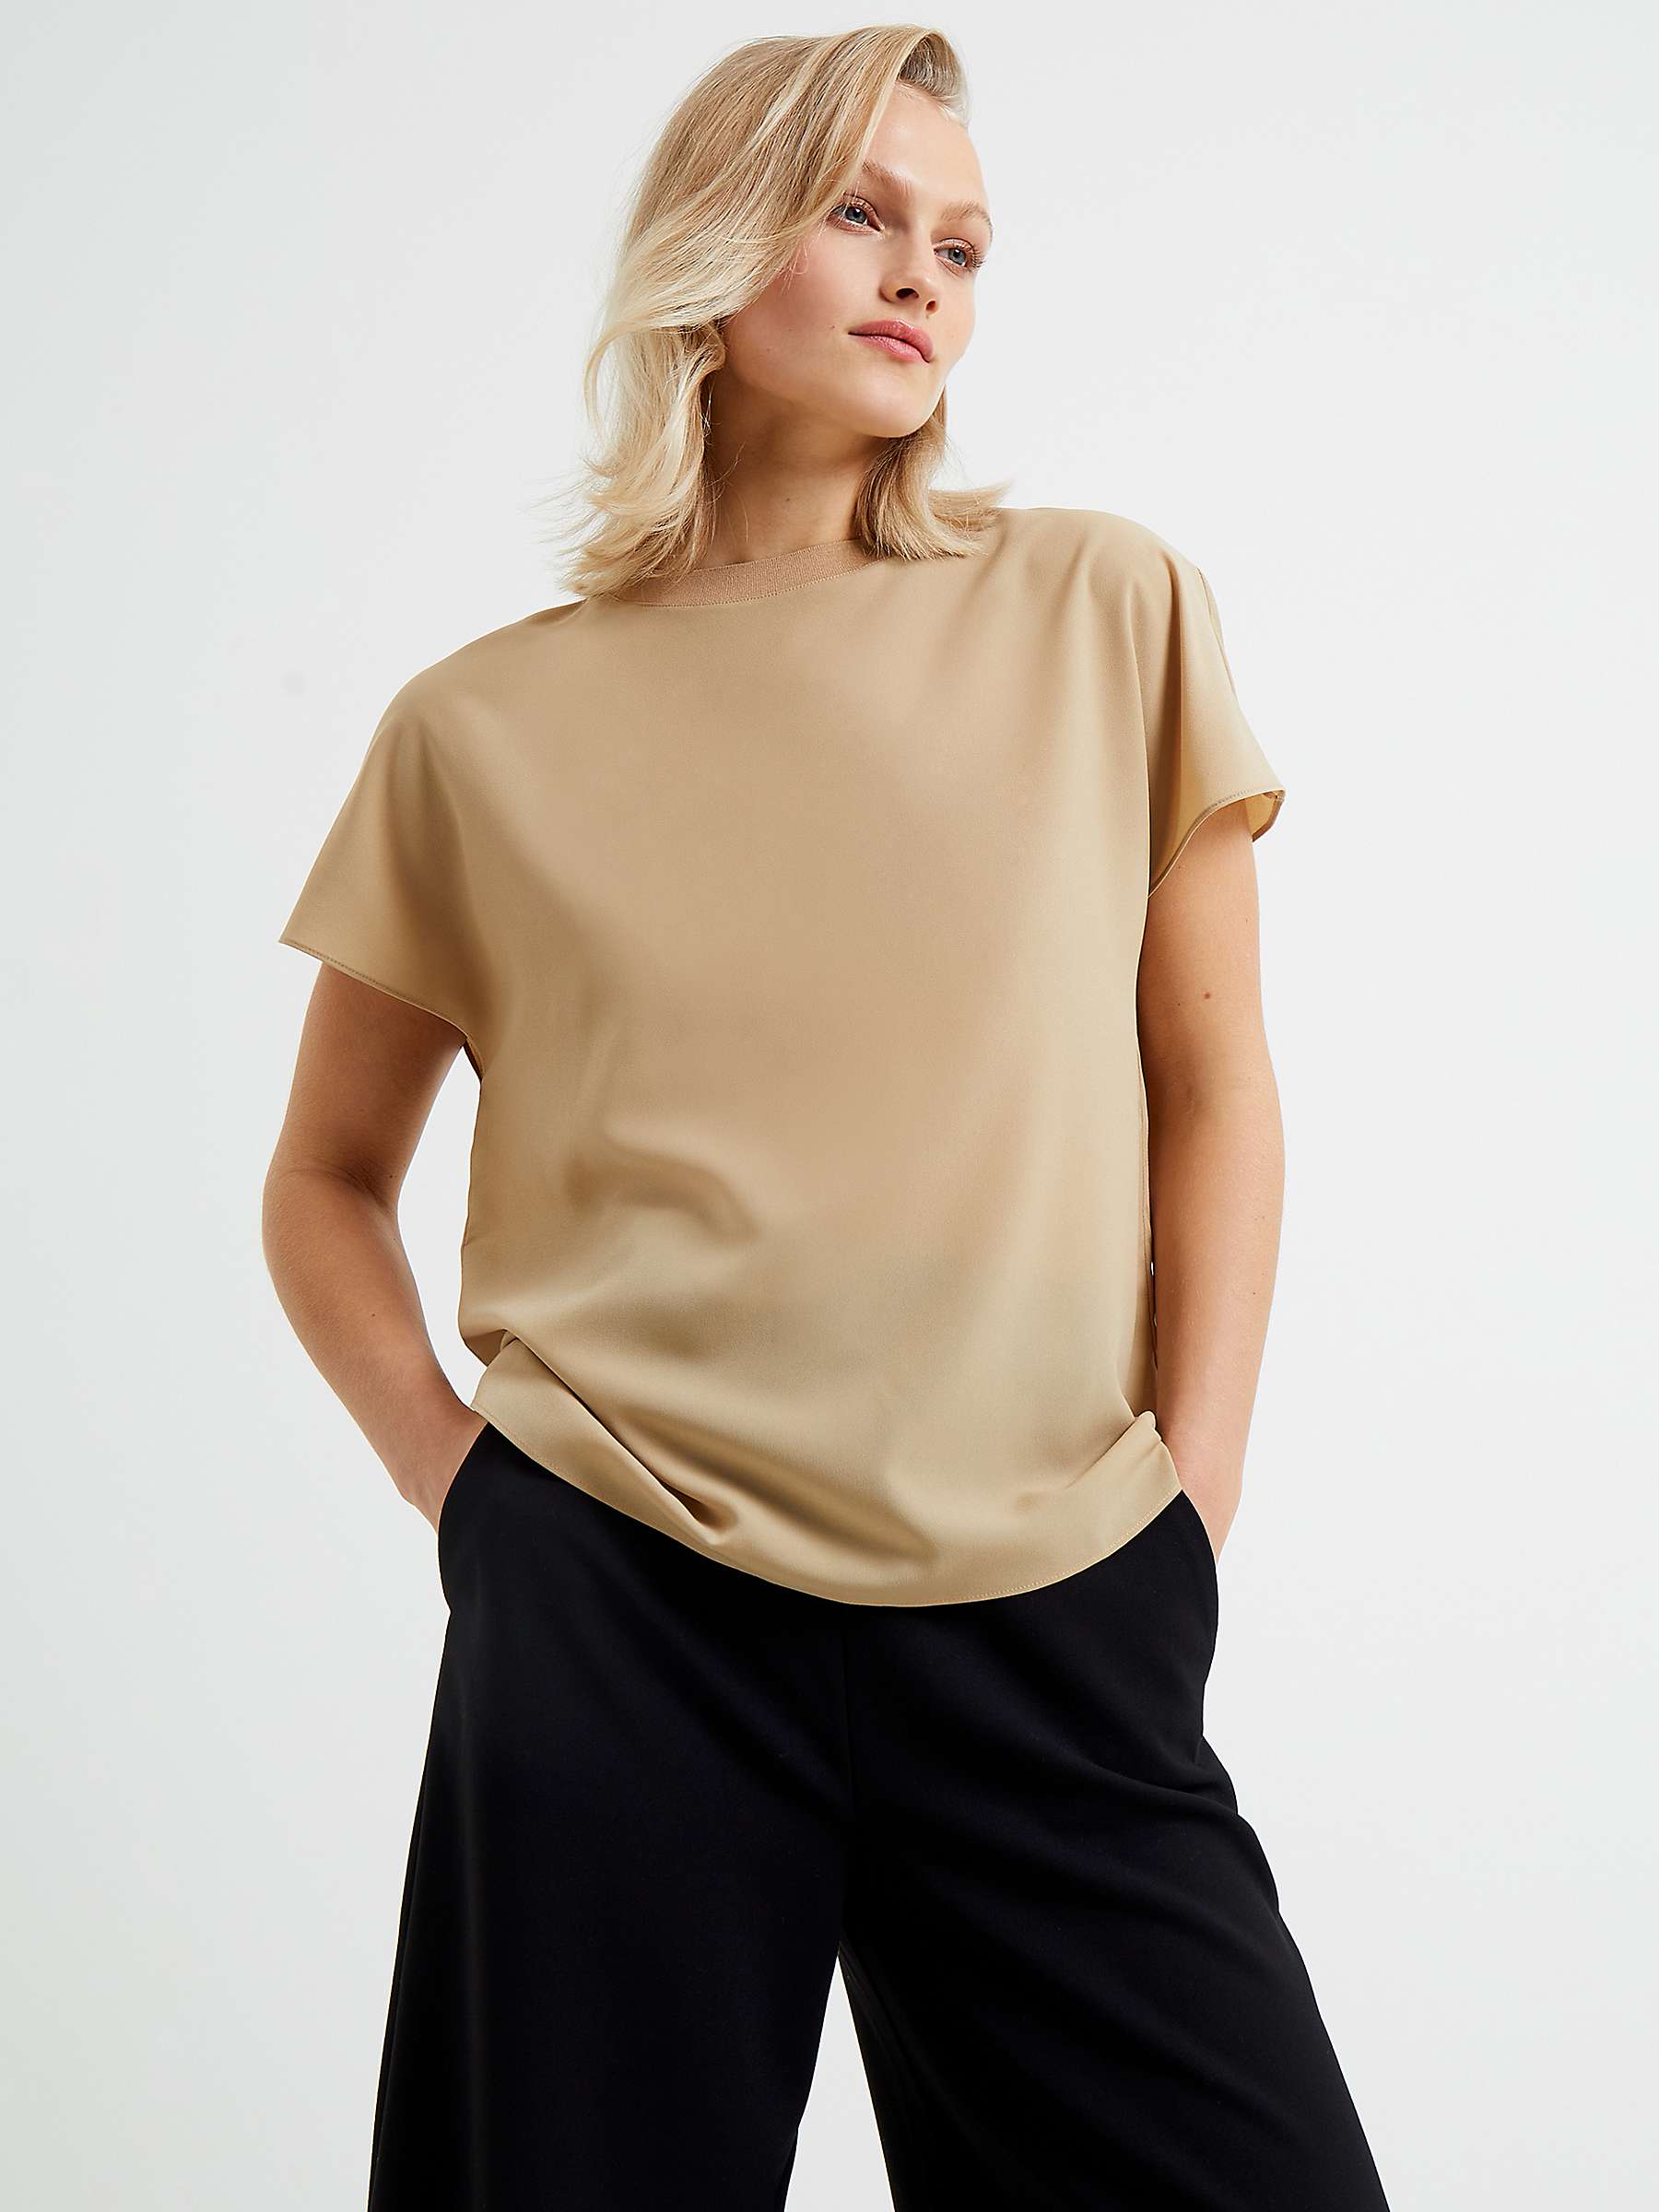 Buy French Connection Crepe Light Crew Neck Top Online at johnlewis.com